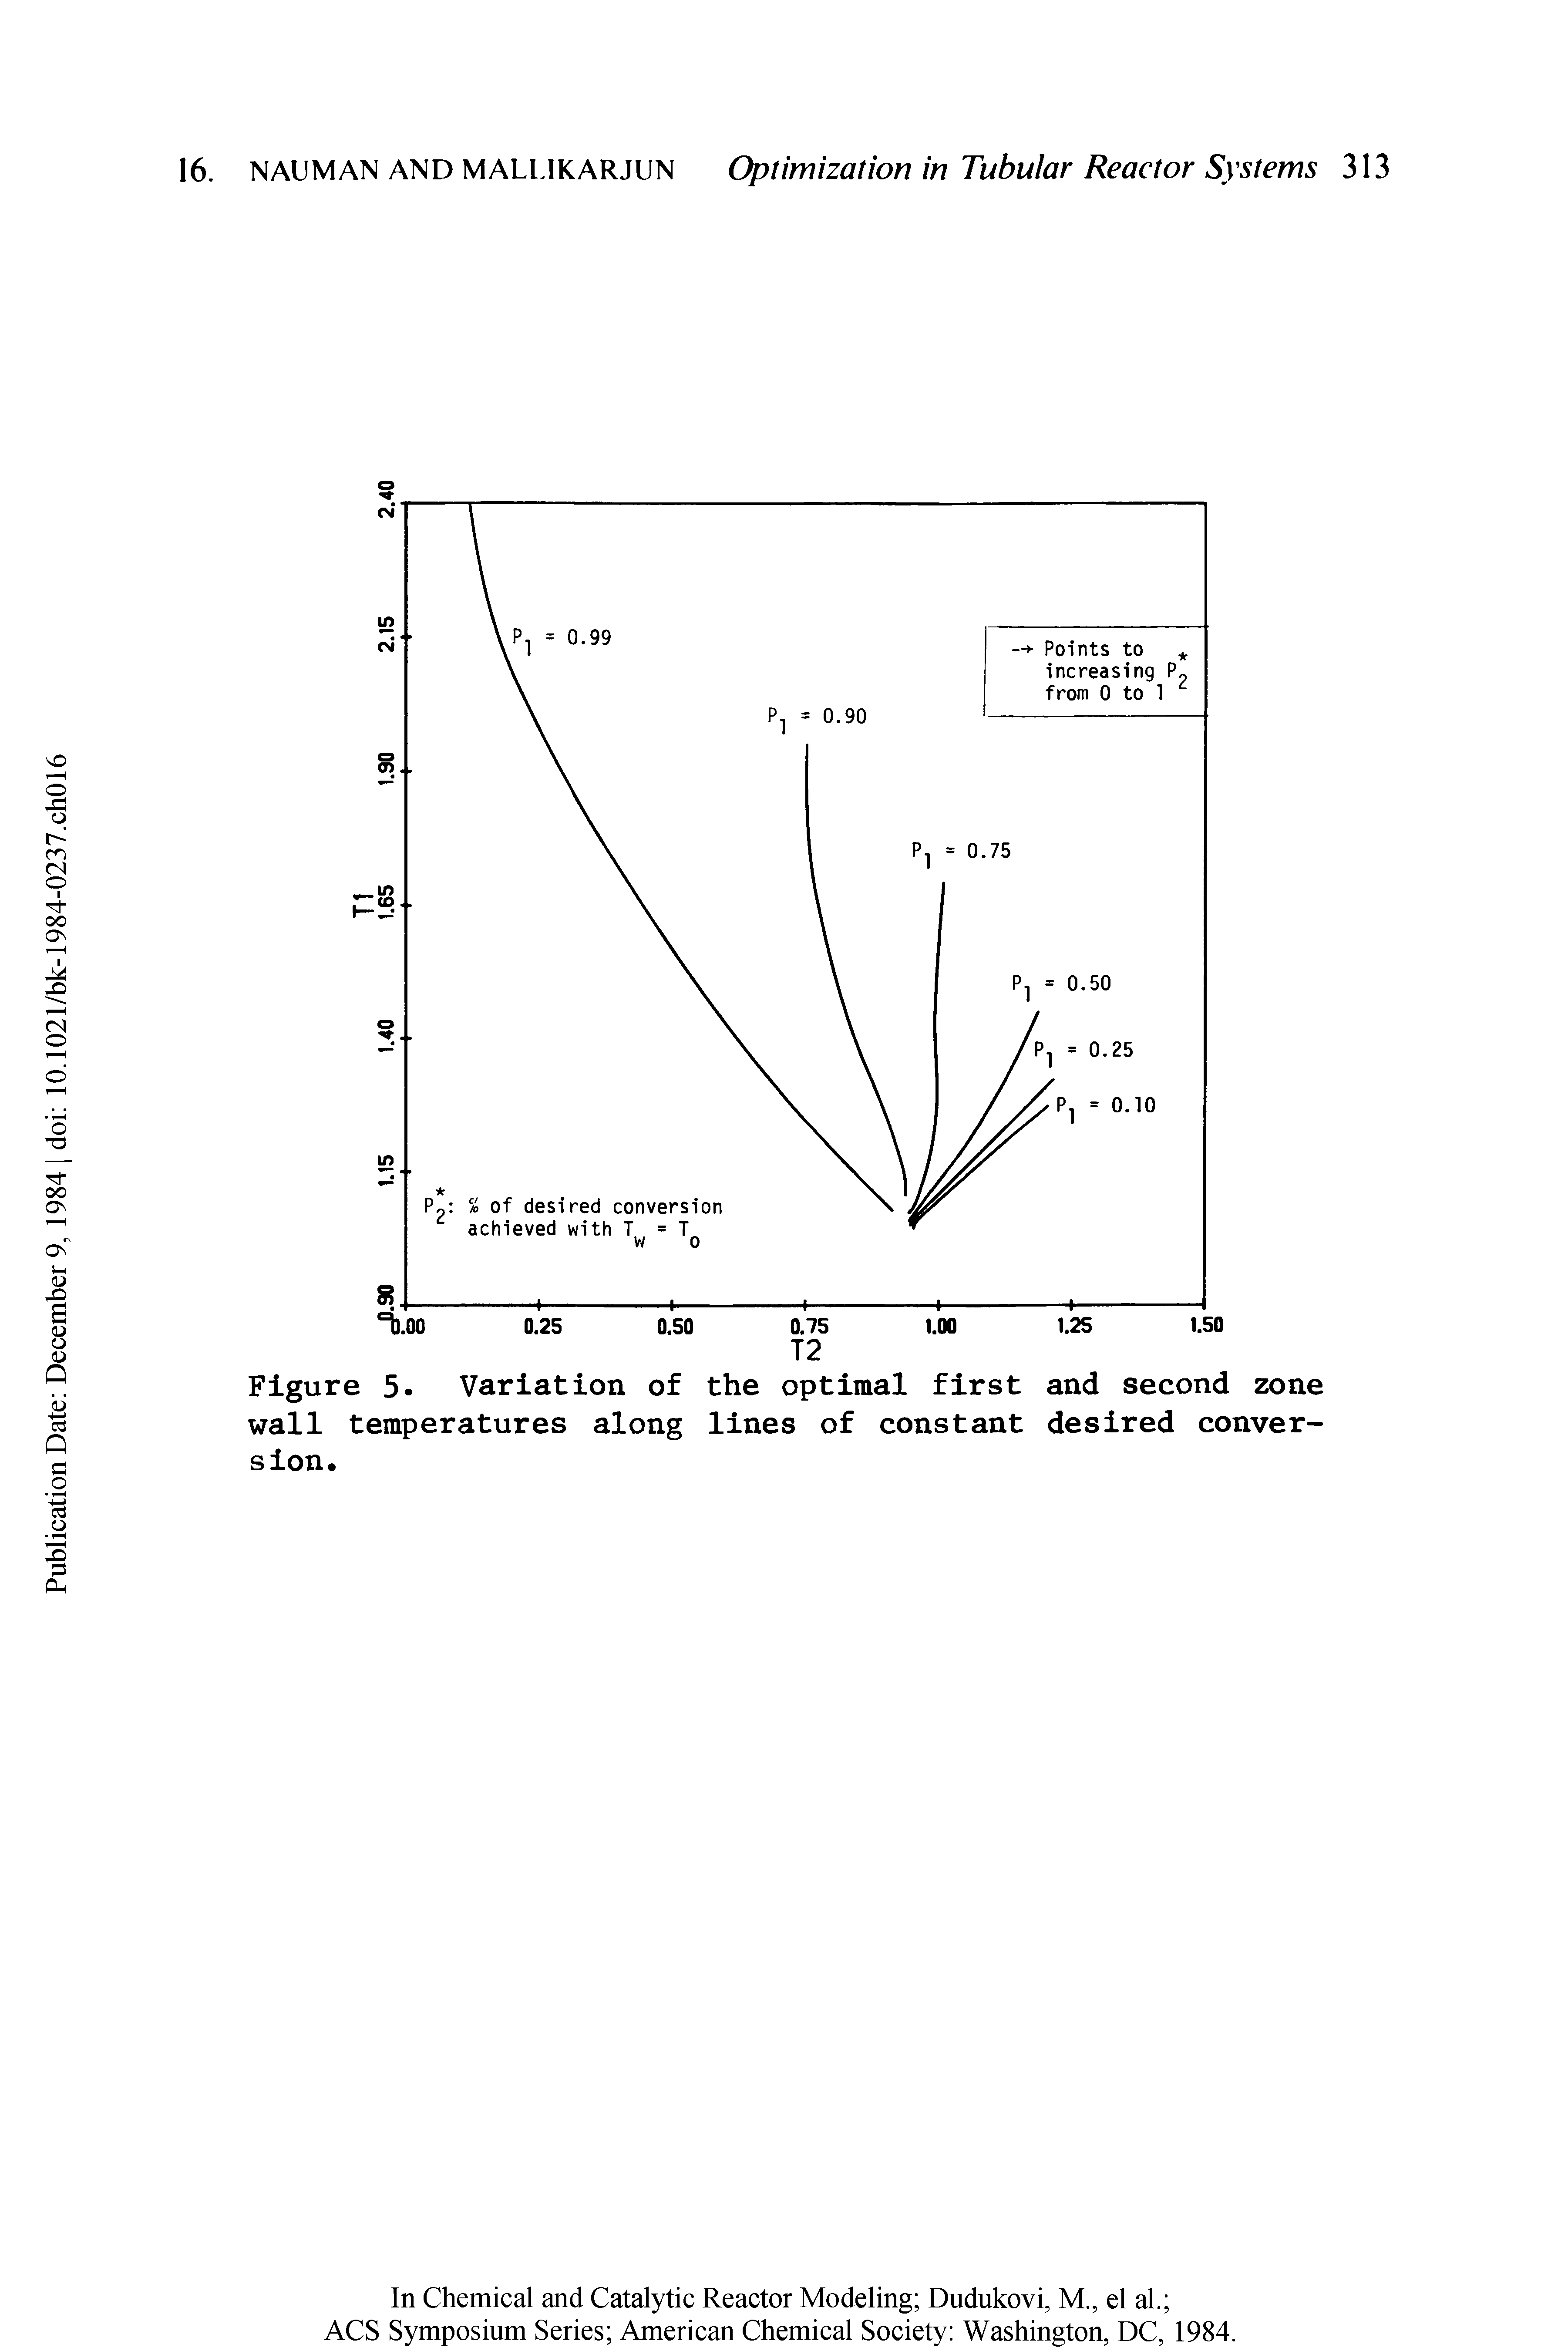 Figure 5. Variation of the optimal first and second zone wall temperatures along lines of constant desired conversion.